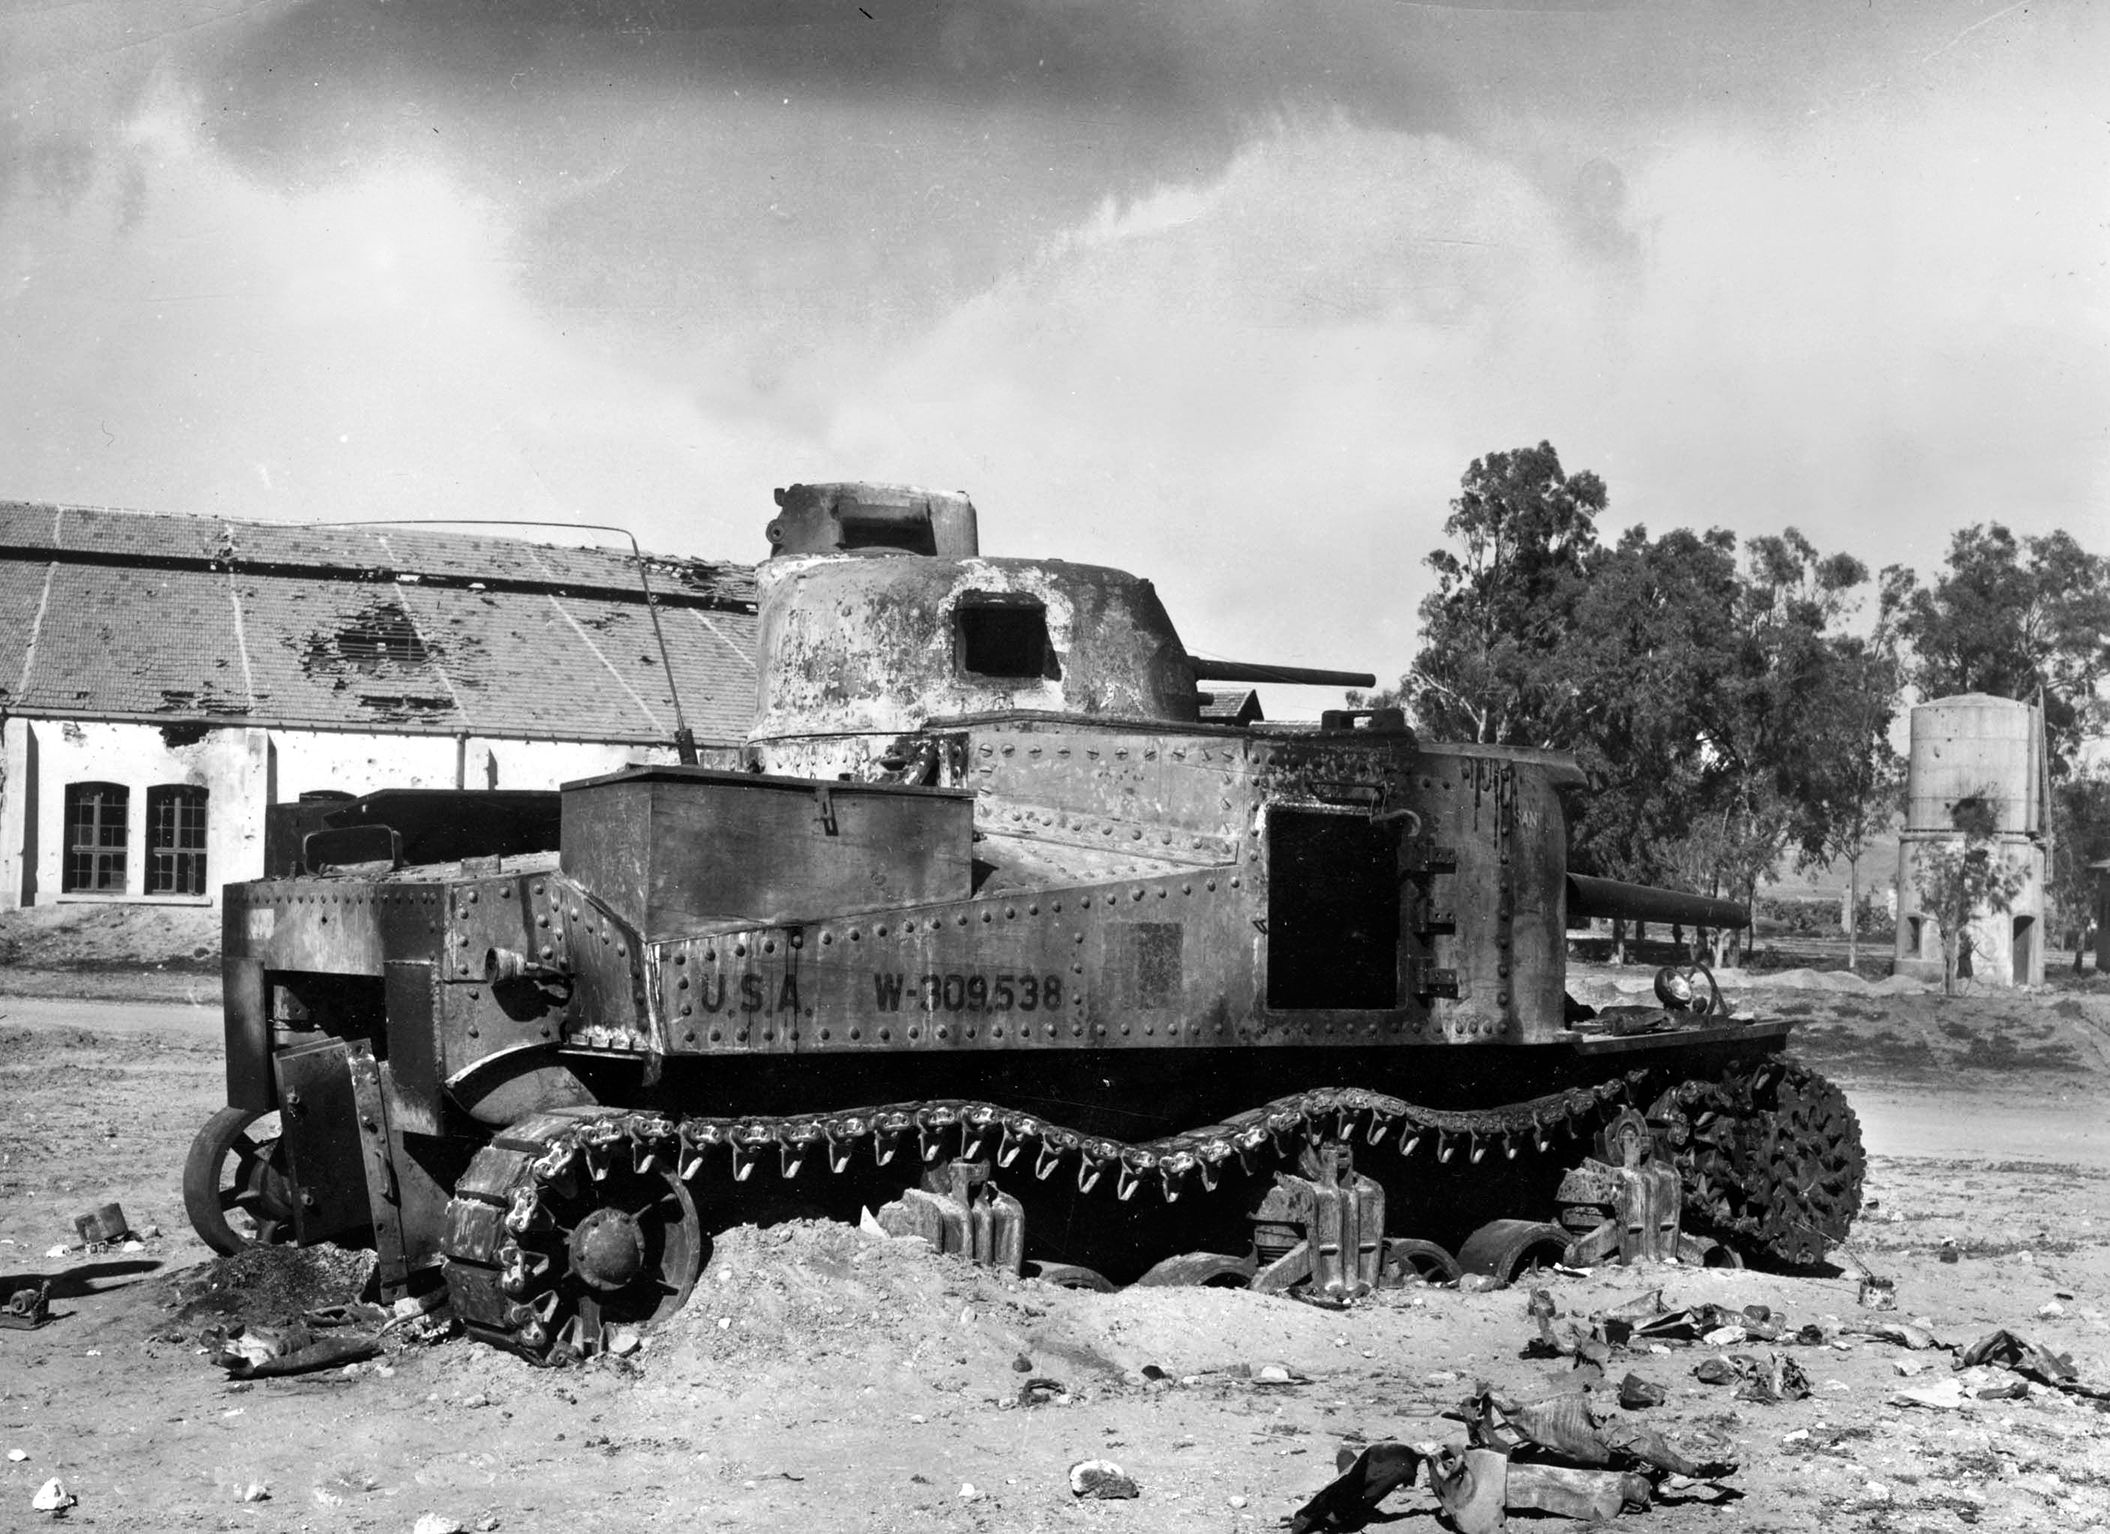 A destroyed M3 tank sits abandoned in Tunisia in February 1943. This tank had taken a direct hit from a German 88mm gun. The British used the Grant tank to good effect prior to receiving the M4 Sherman medium tank.